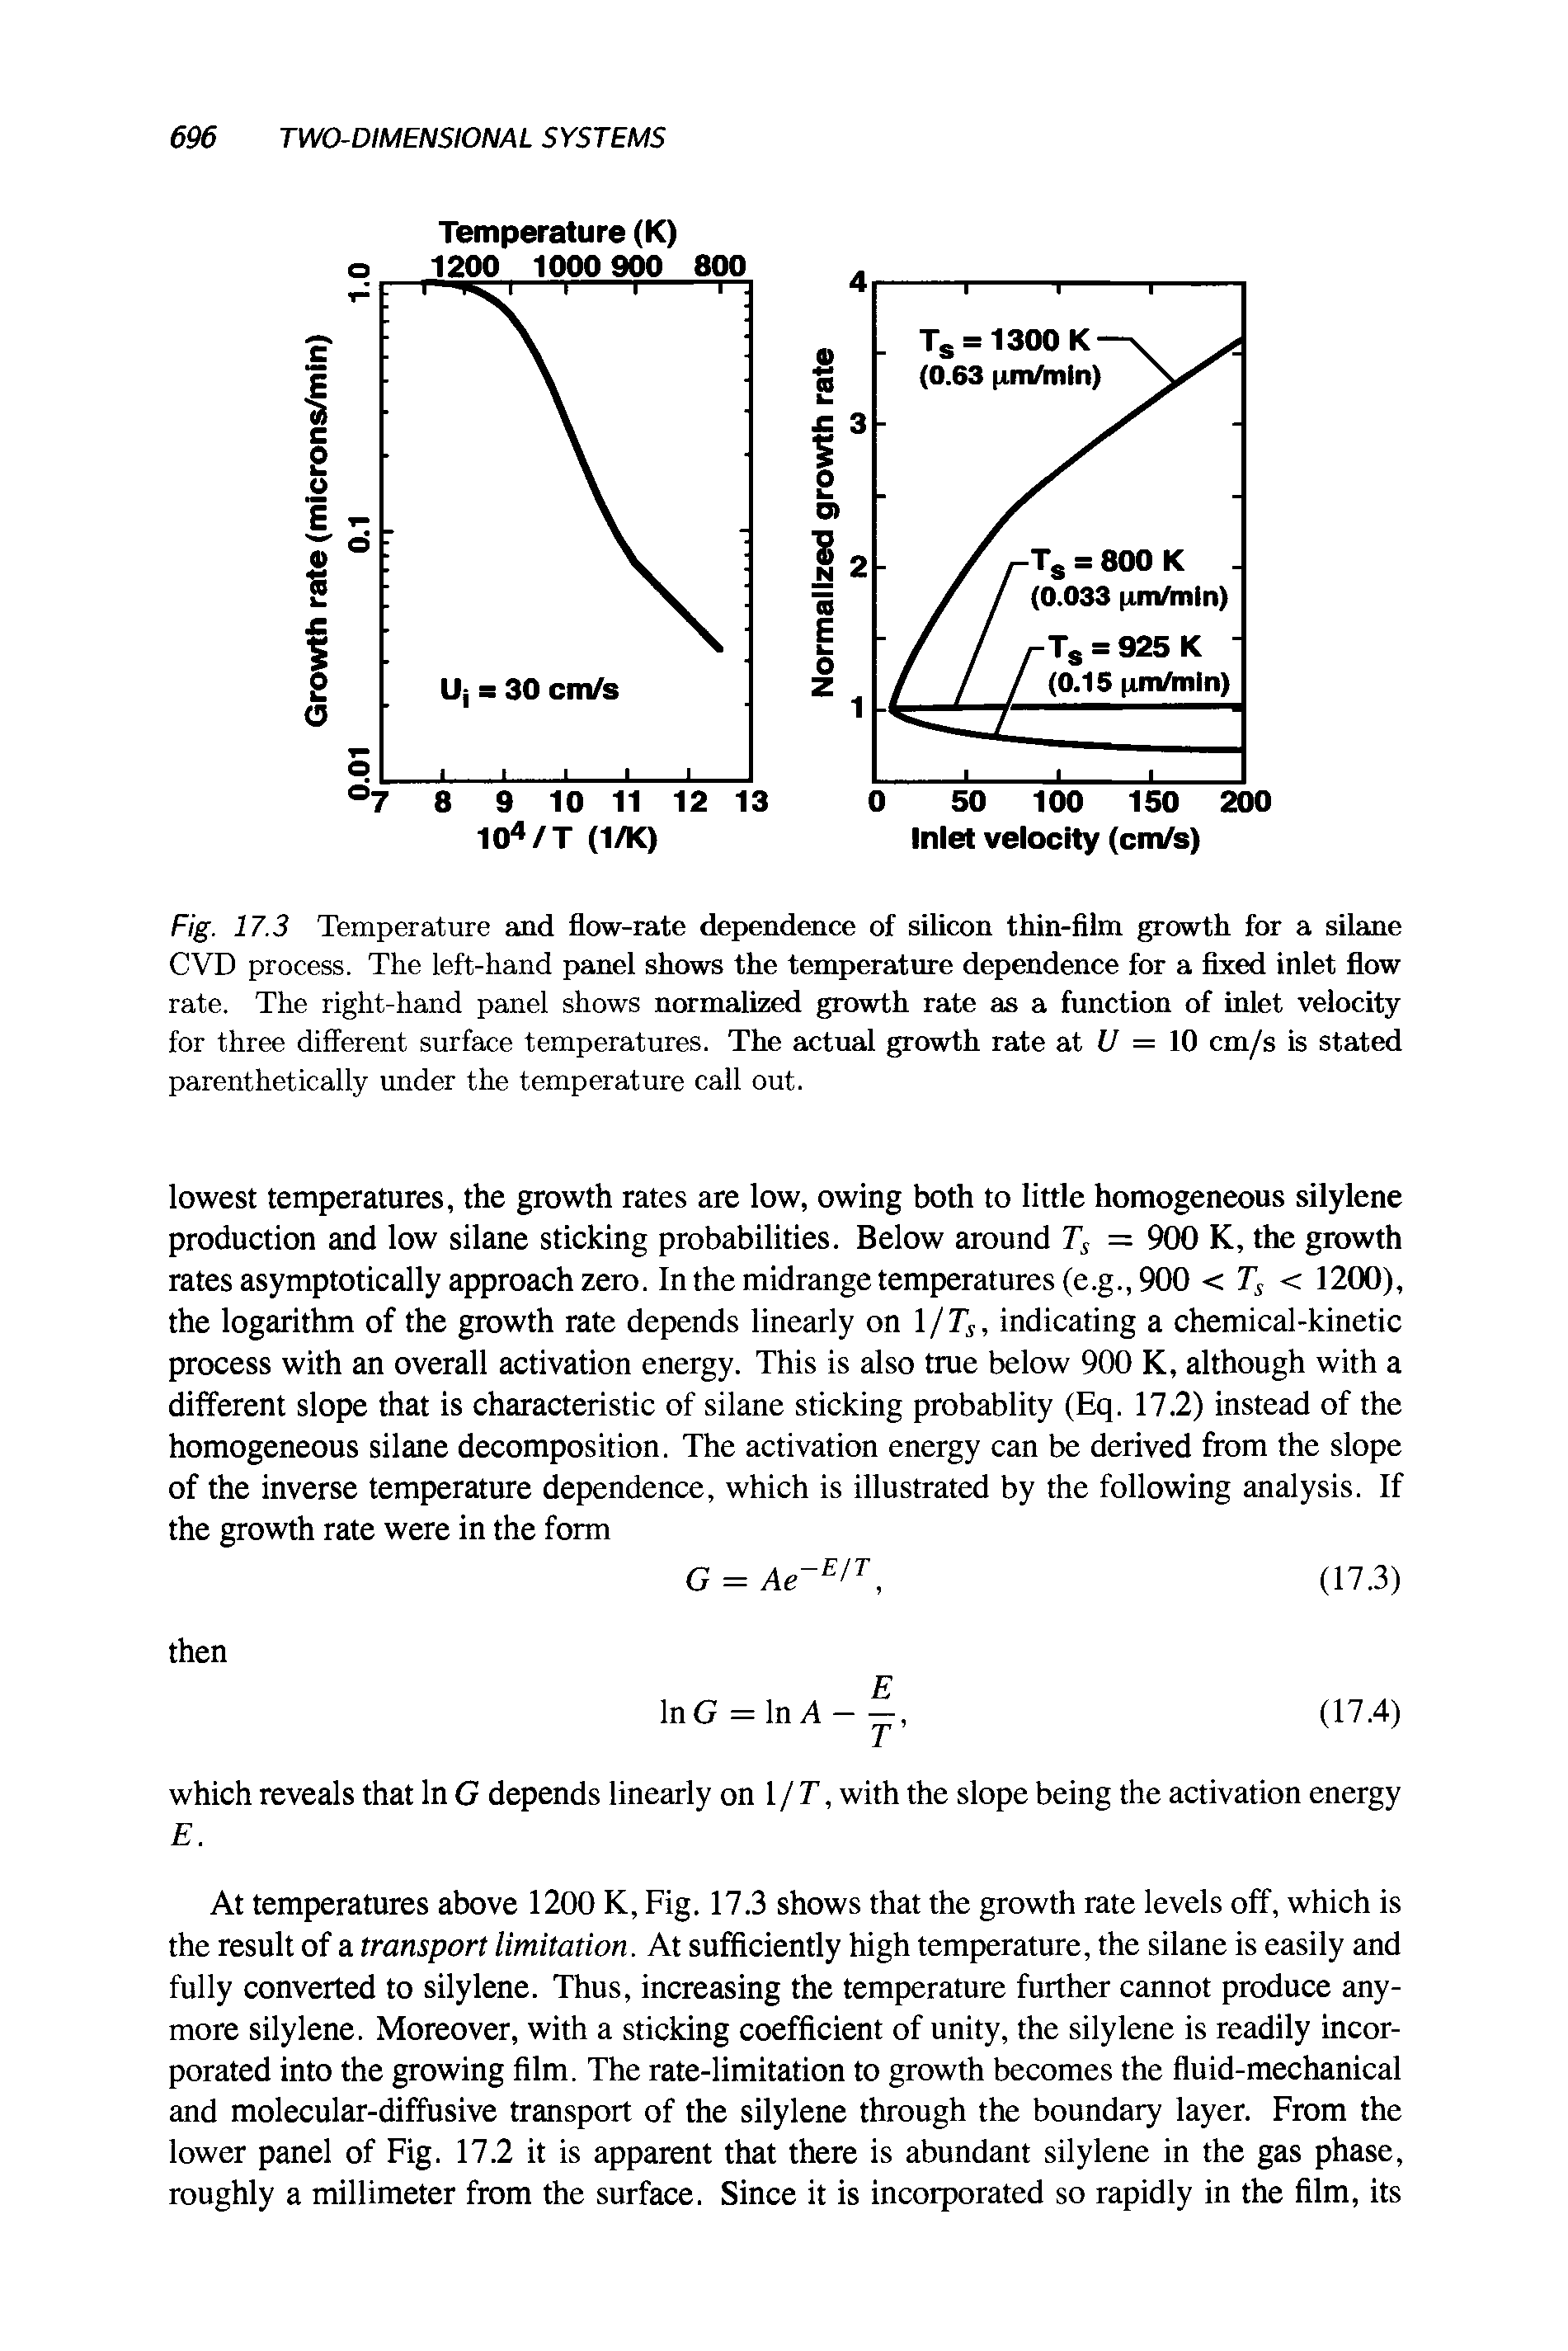 Fig. 17.3 Temperature and flow-rate dependence of silicon thin-film growth for a silane CVD process. The left-hand panel shows the temperature dependence for a fixed inlet flow rate. The right-hand panel shows normalized growth rate as a function of inlet velocity for three different surface temperatures. The actual growth rate at U = 10 cm/s is stated parenthetically under the temperature call out.